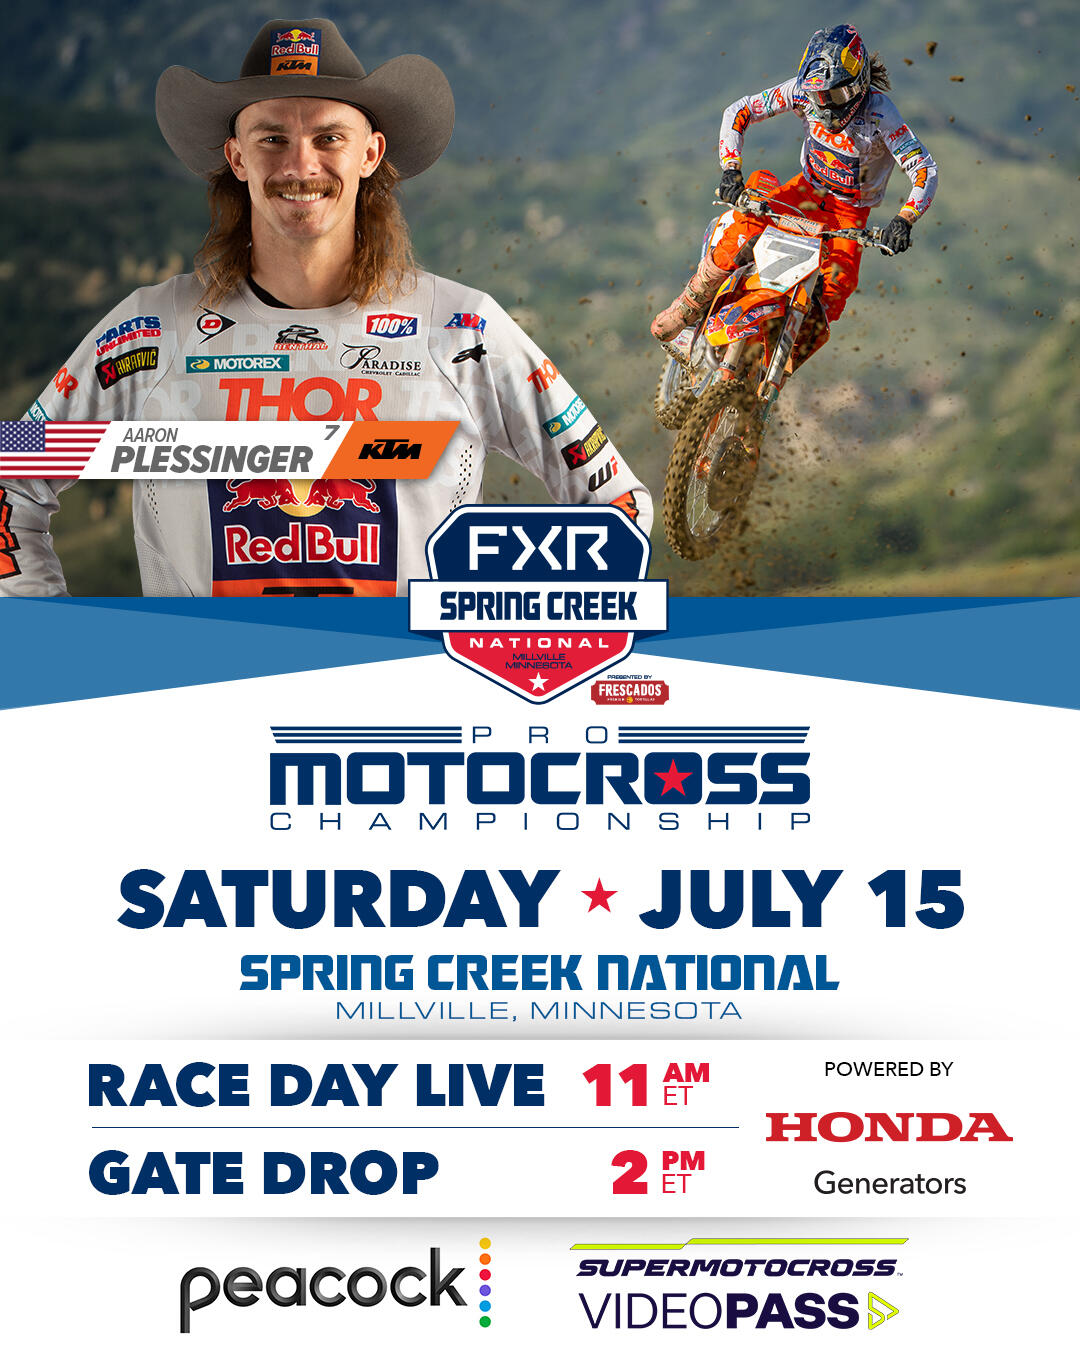 How To Watch FXR Spring Creek National Pro Motocross Championship